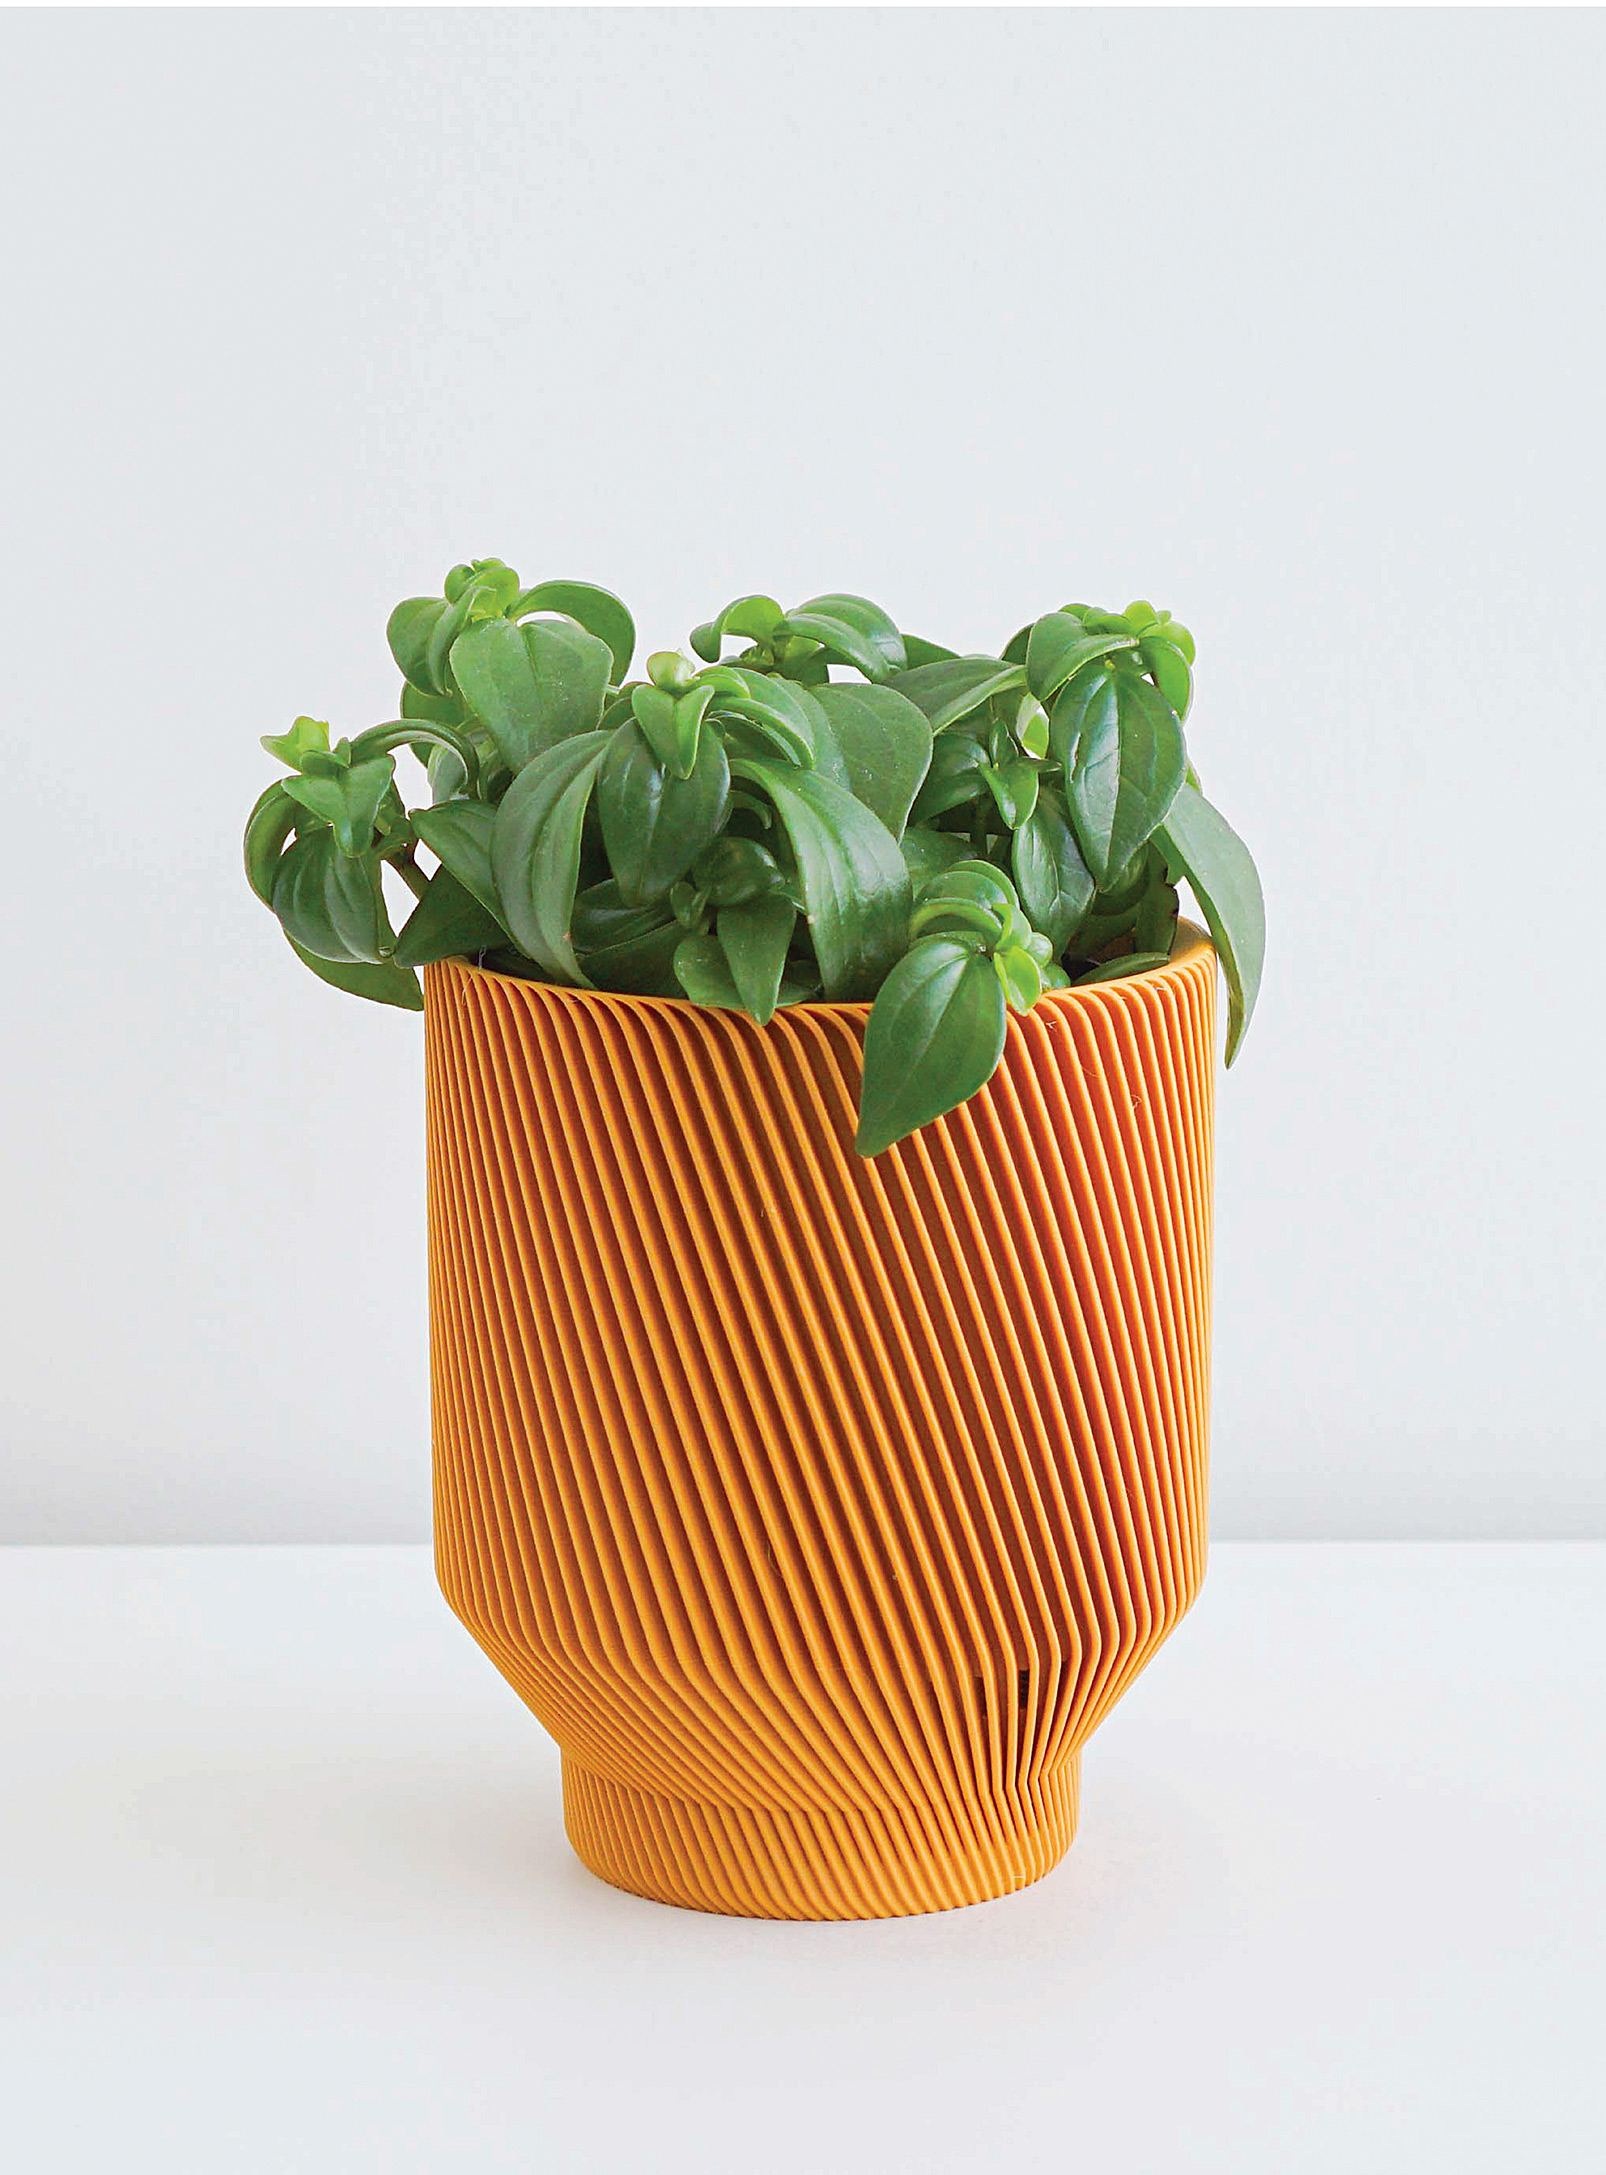 Conifer Homewares Spruce Plant-based Planter See Available Sizes In Golden Yellow